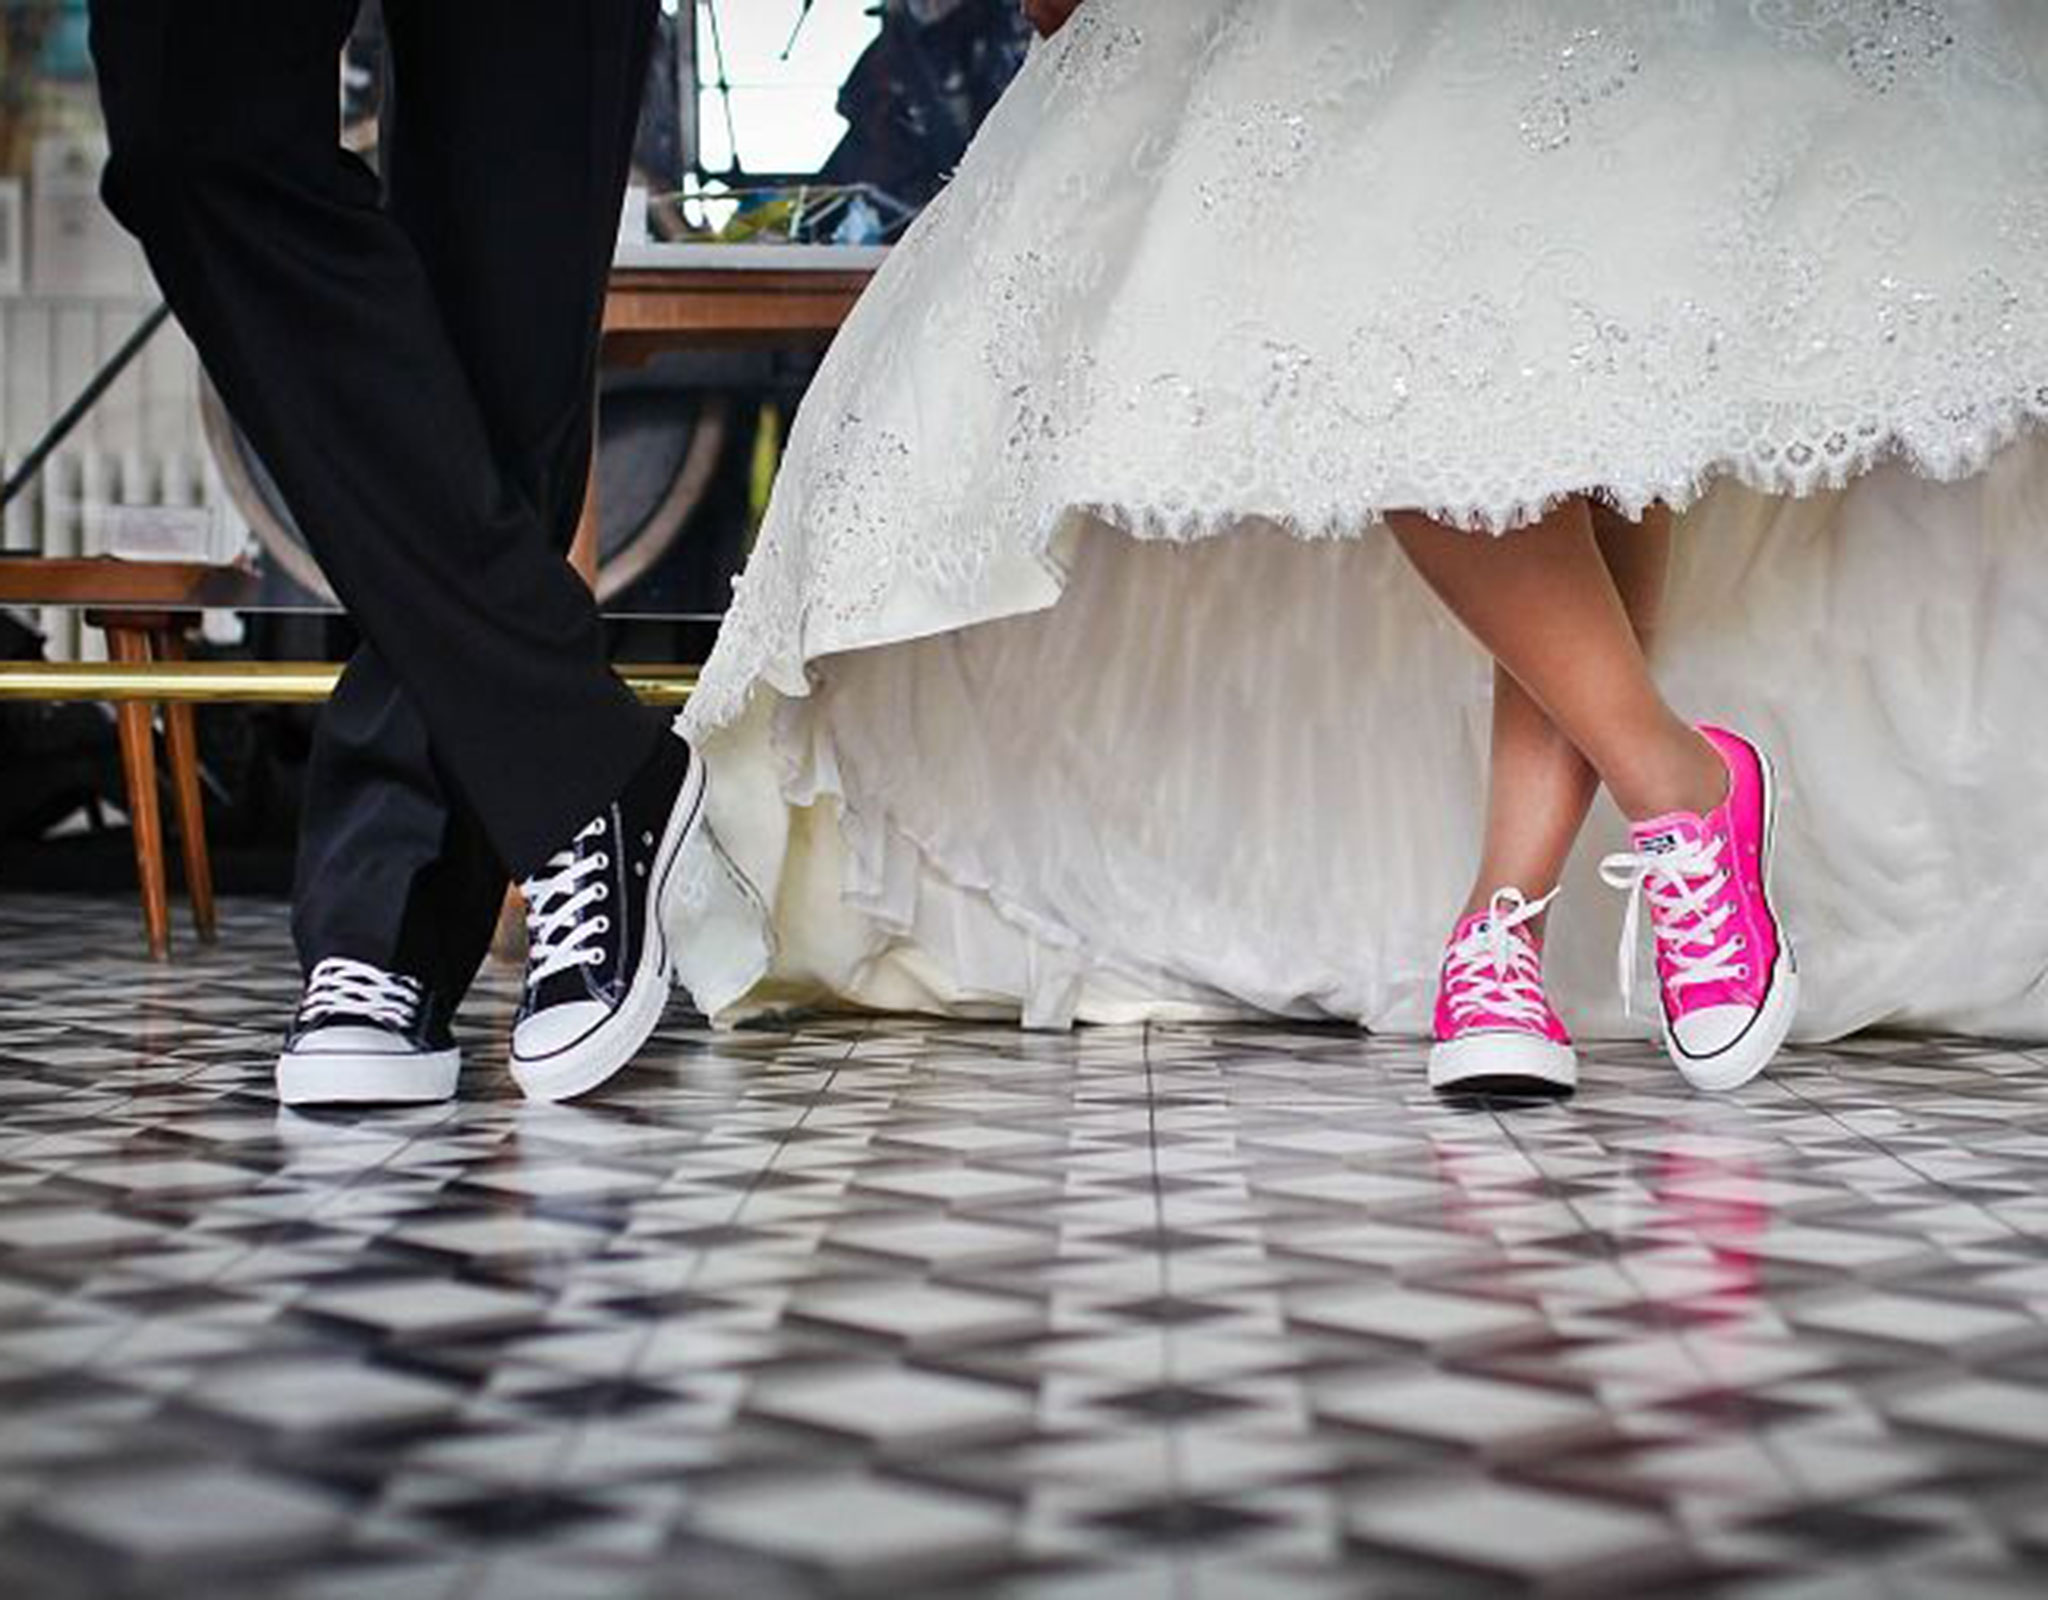 Groom and Bride's legs showing the are wearing Converse All Stars